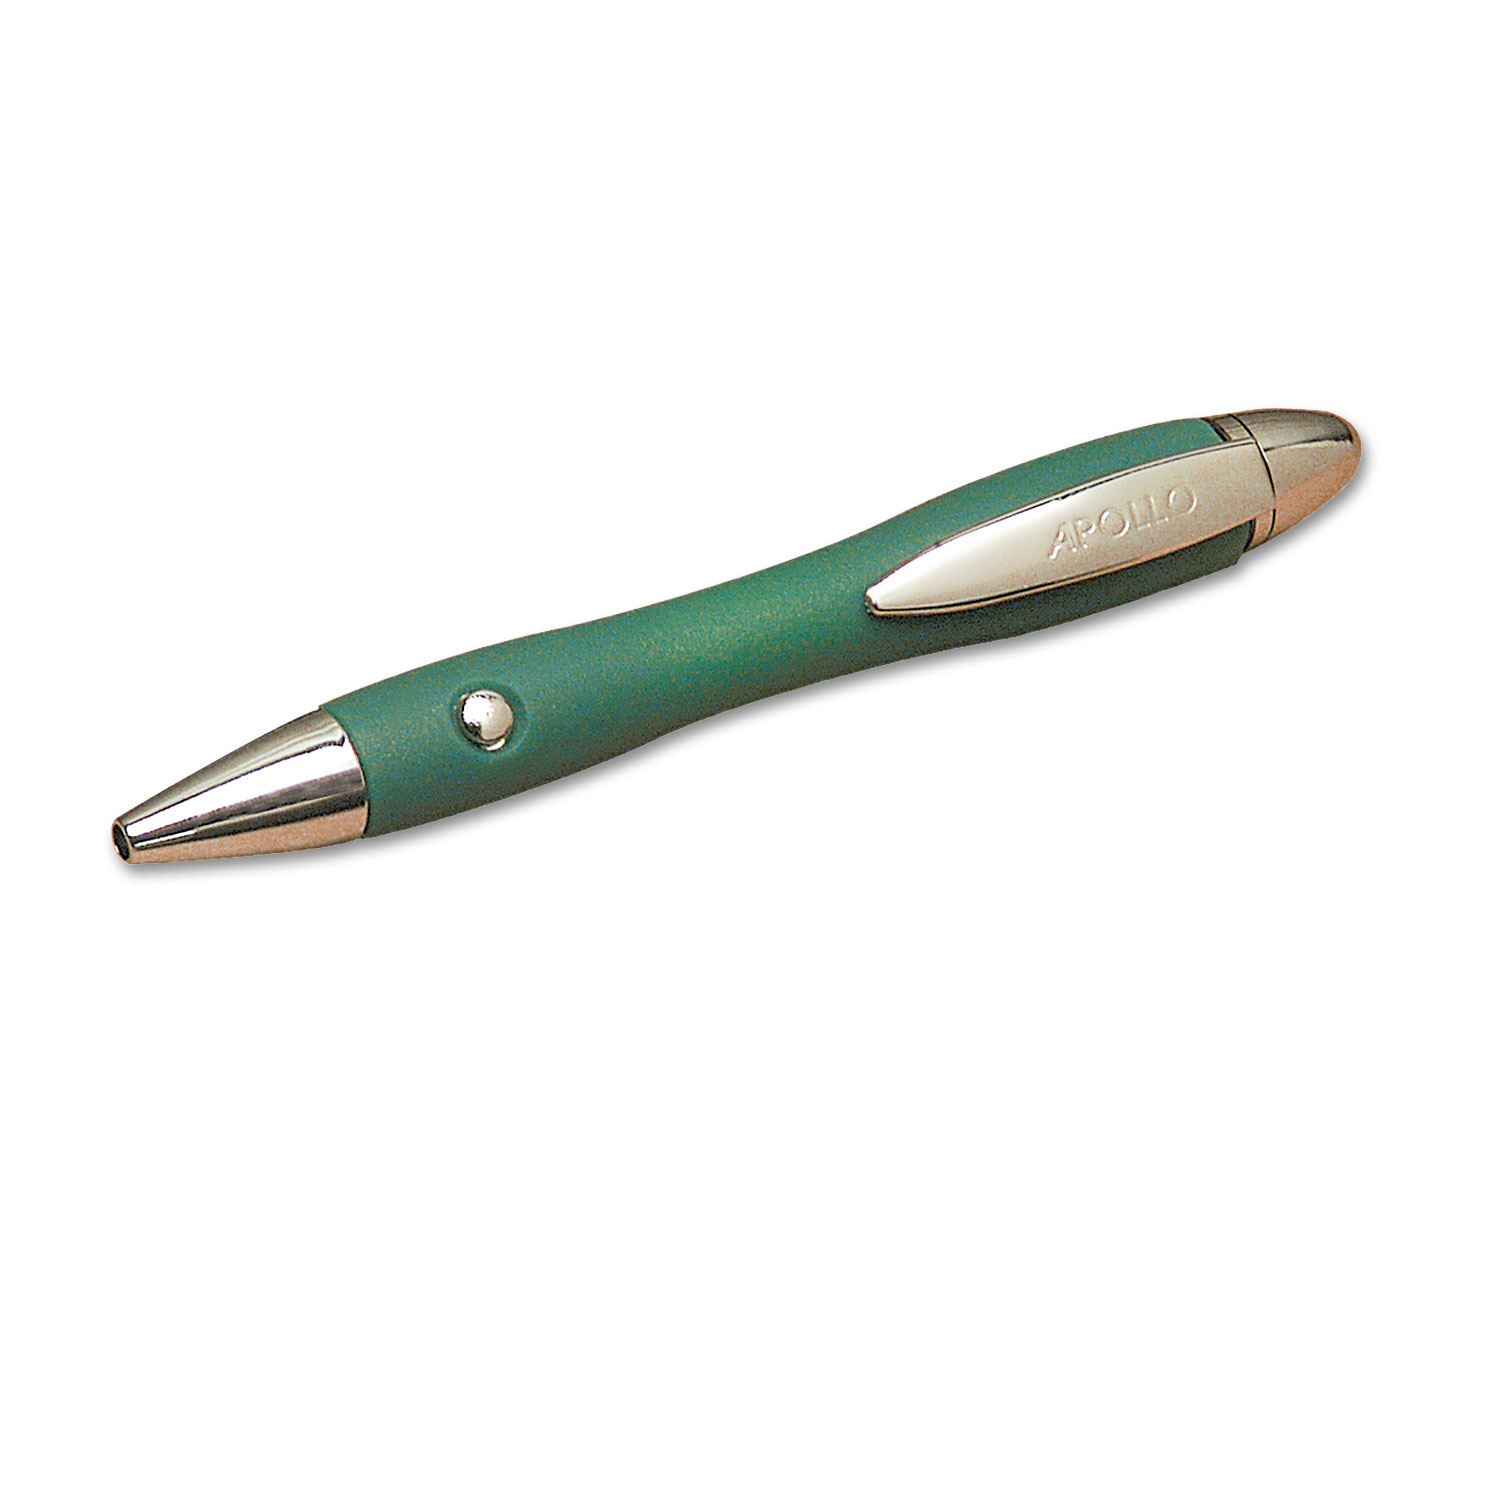 Contour Comfort Laser Pointer, Class 3A, Projects 1148 ft, Jade Green